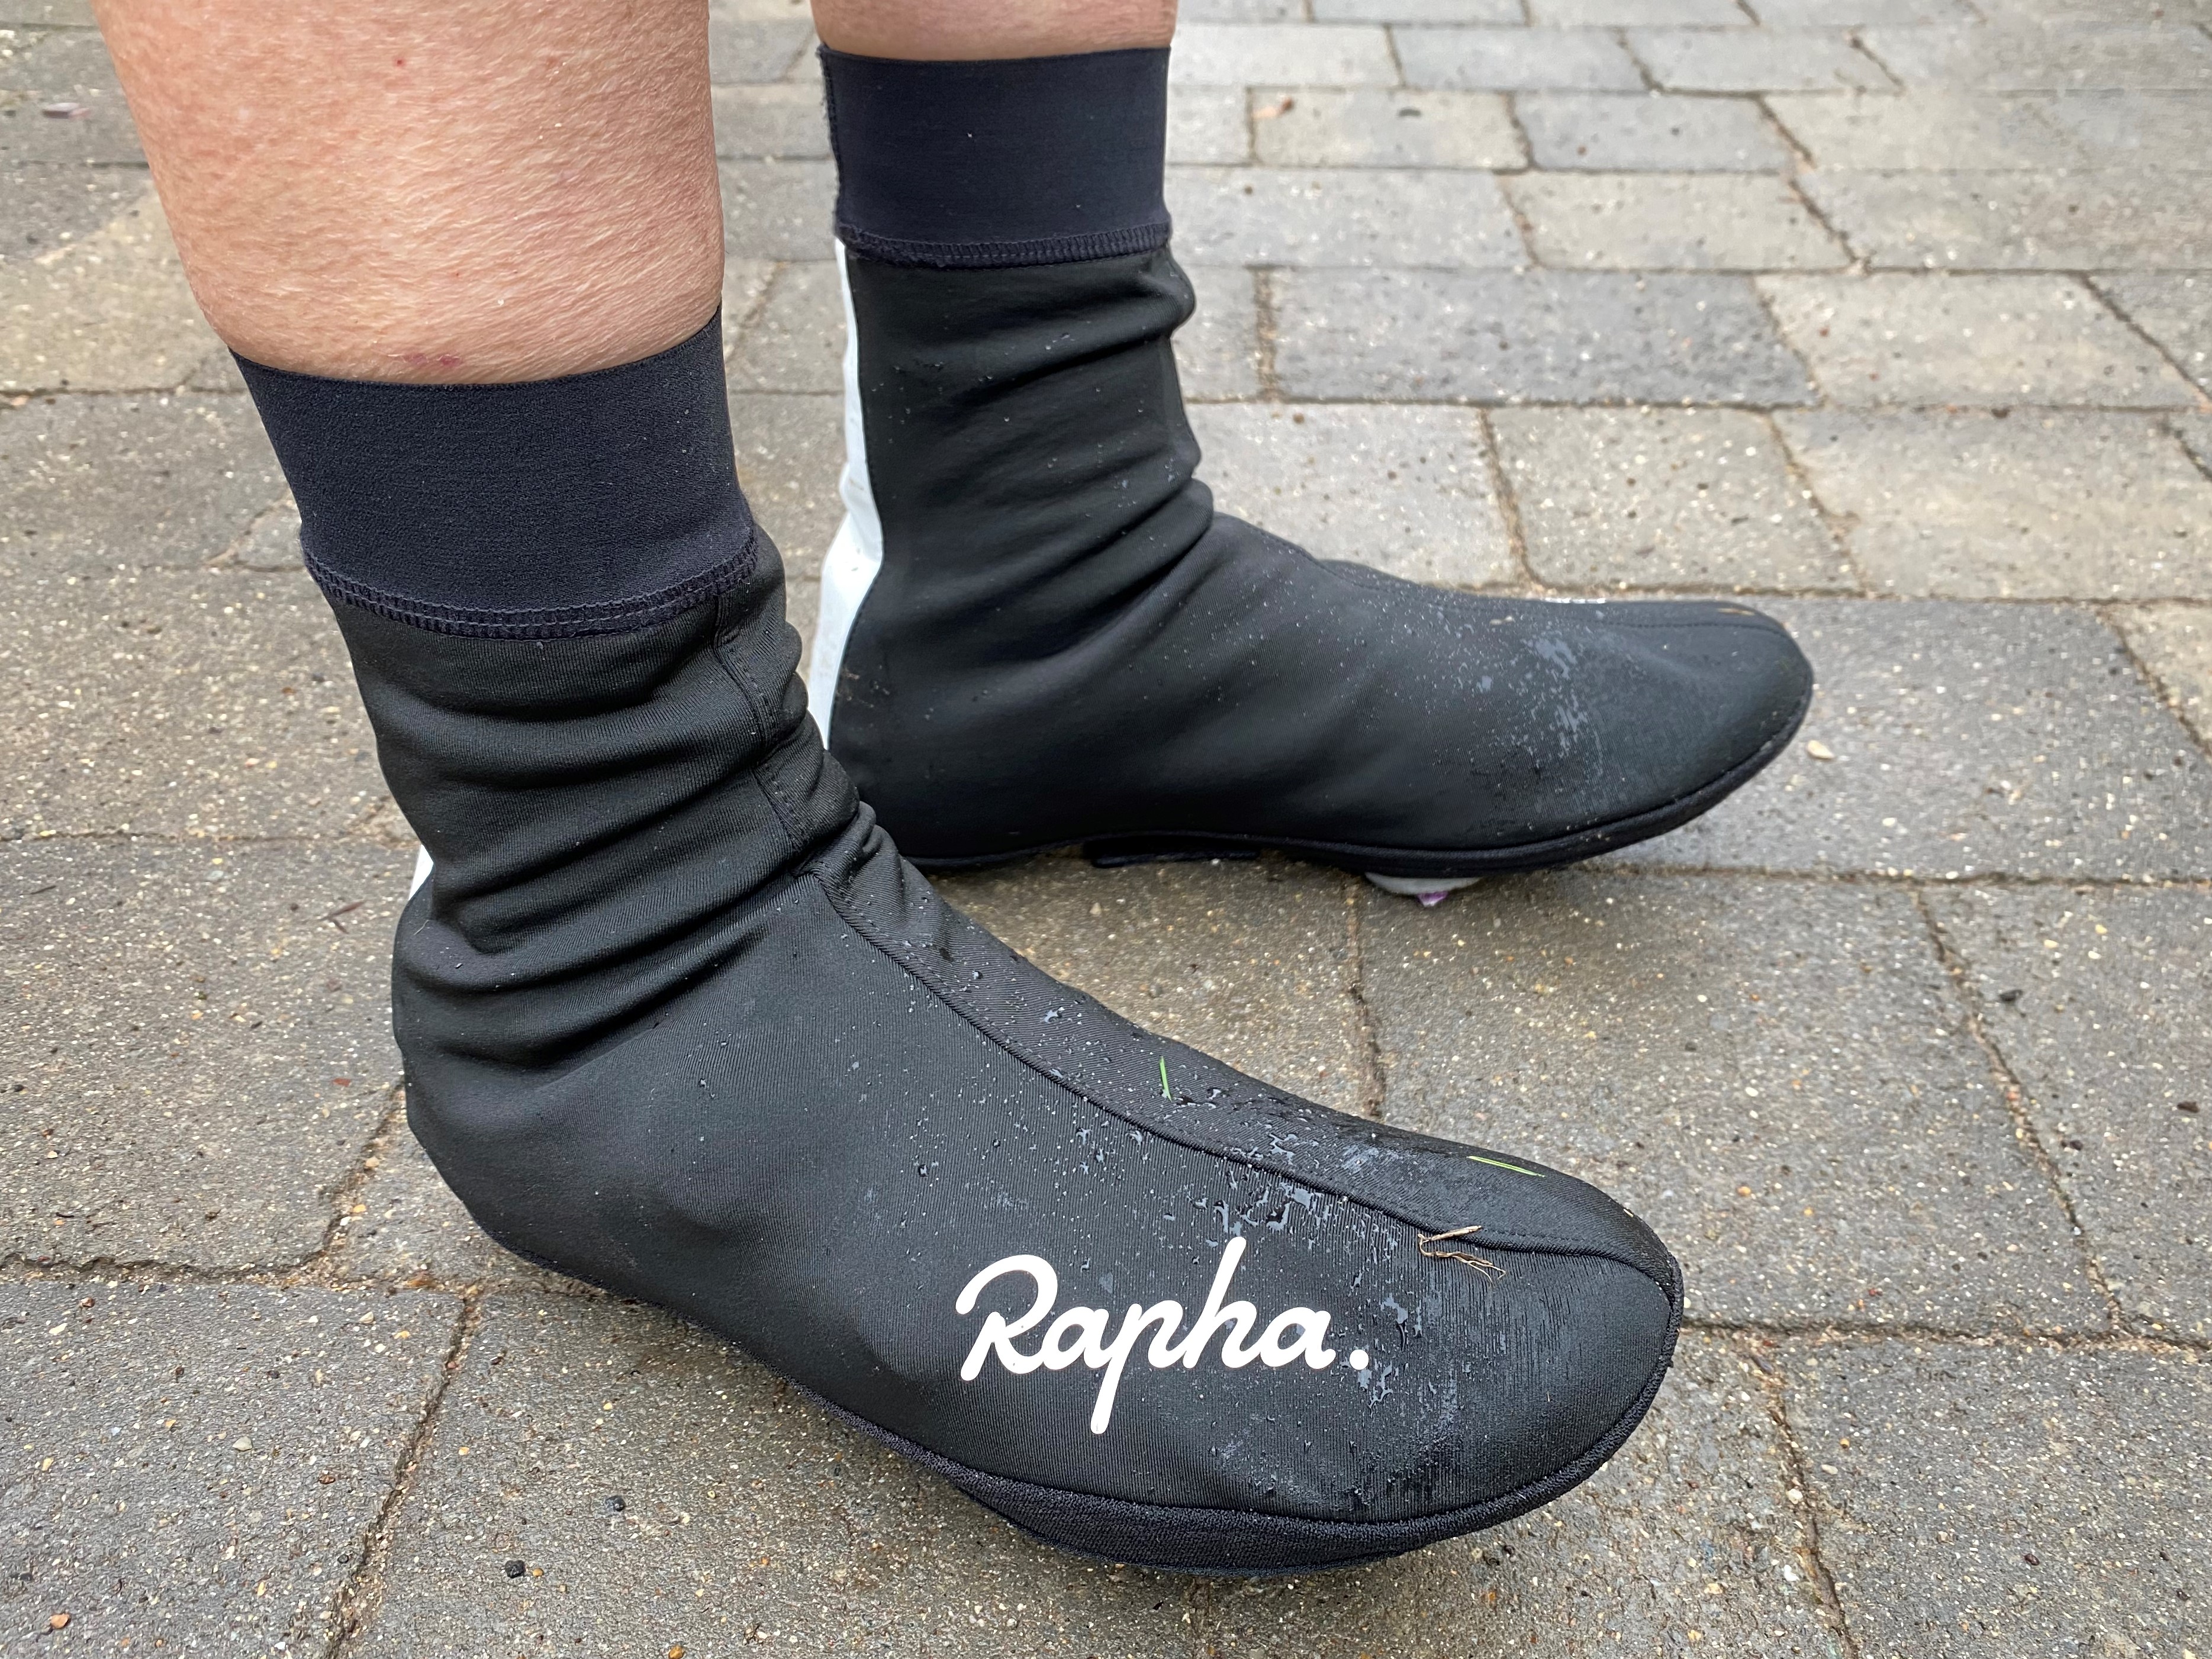 Rider wearing Rapha's Winter Overshoes.